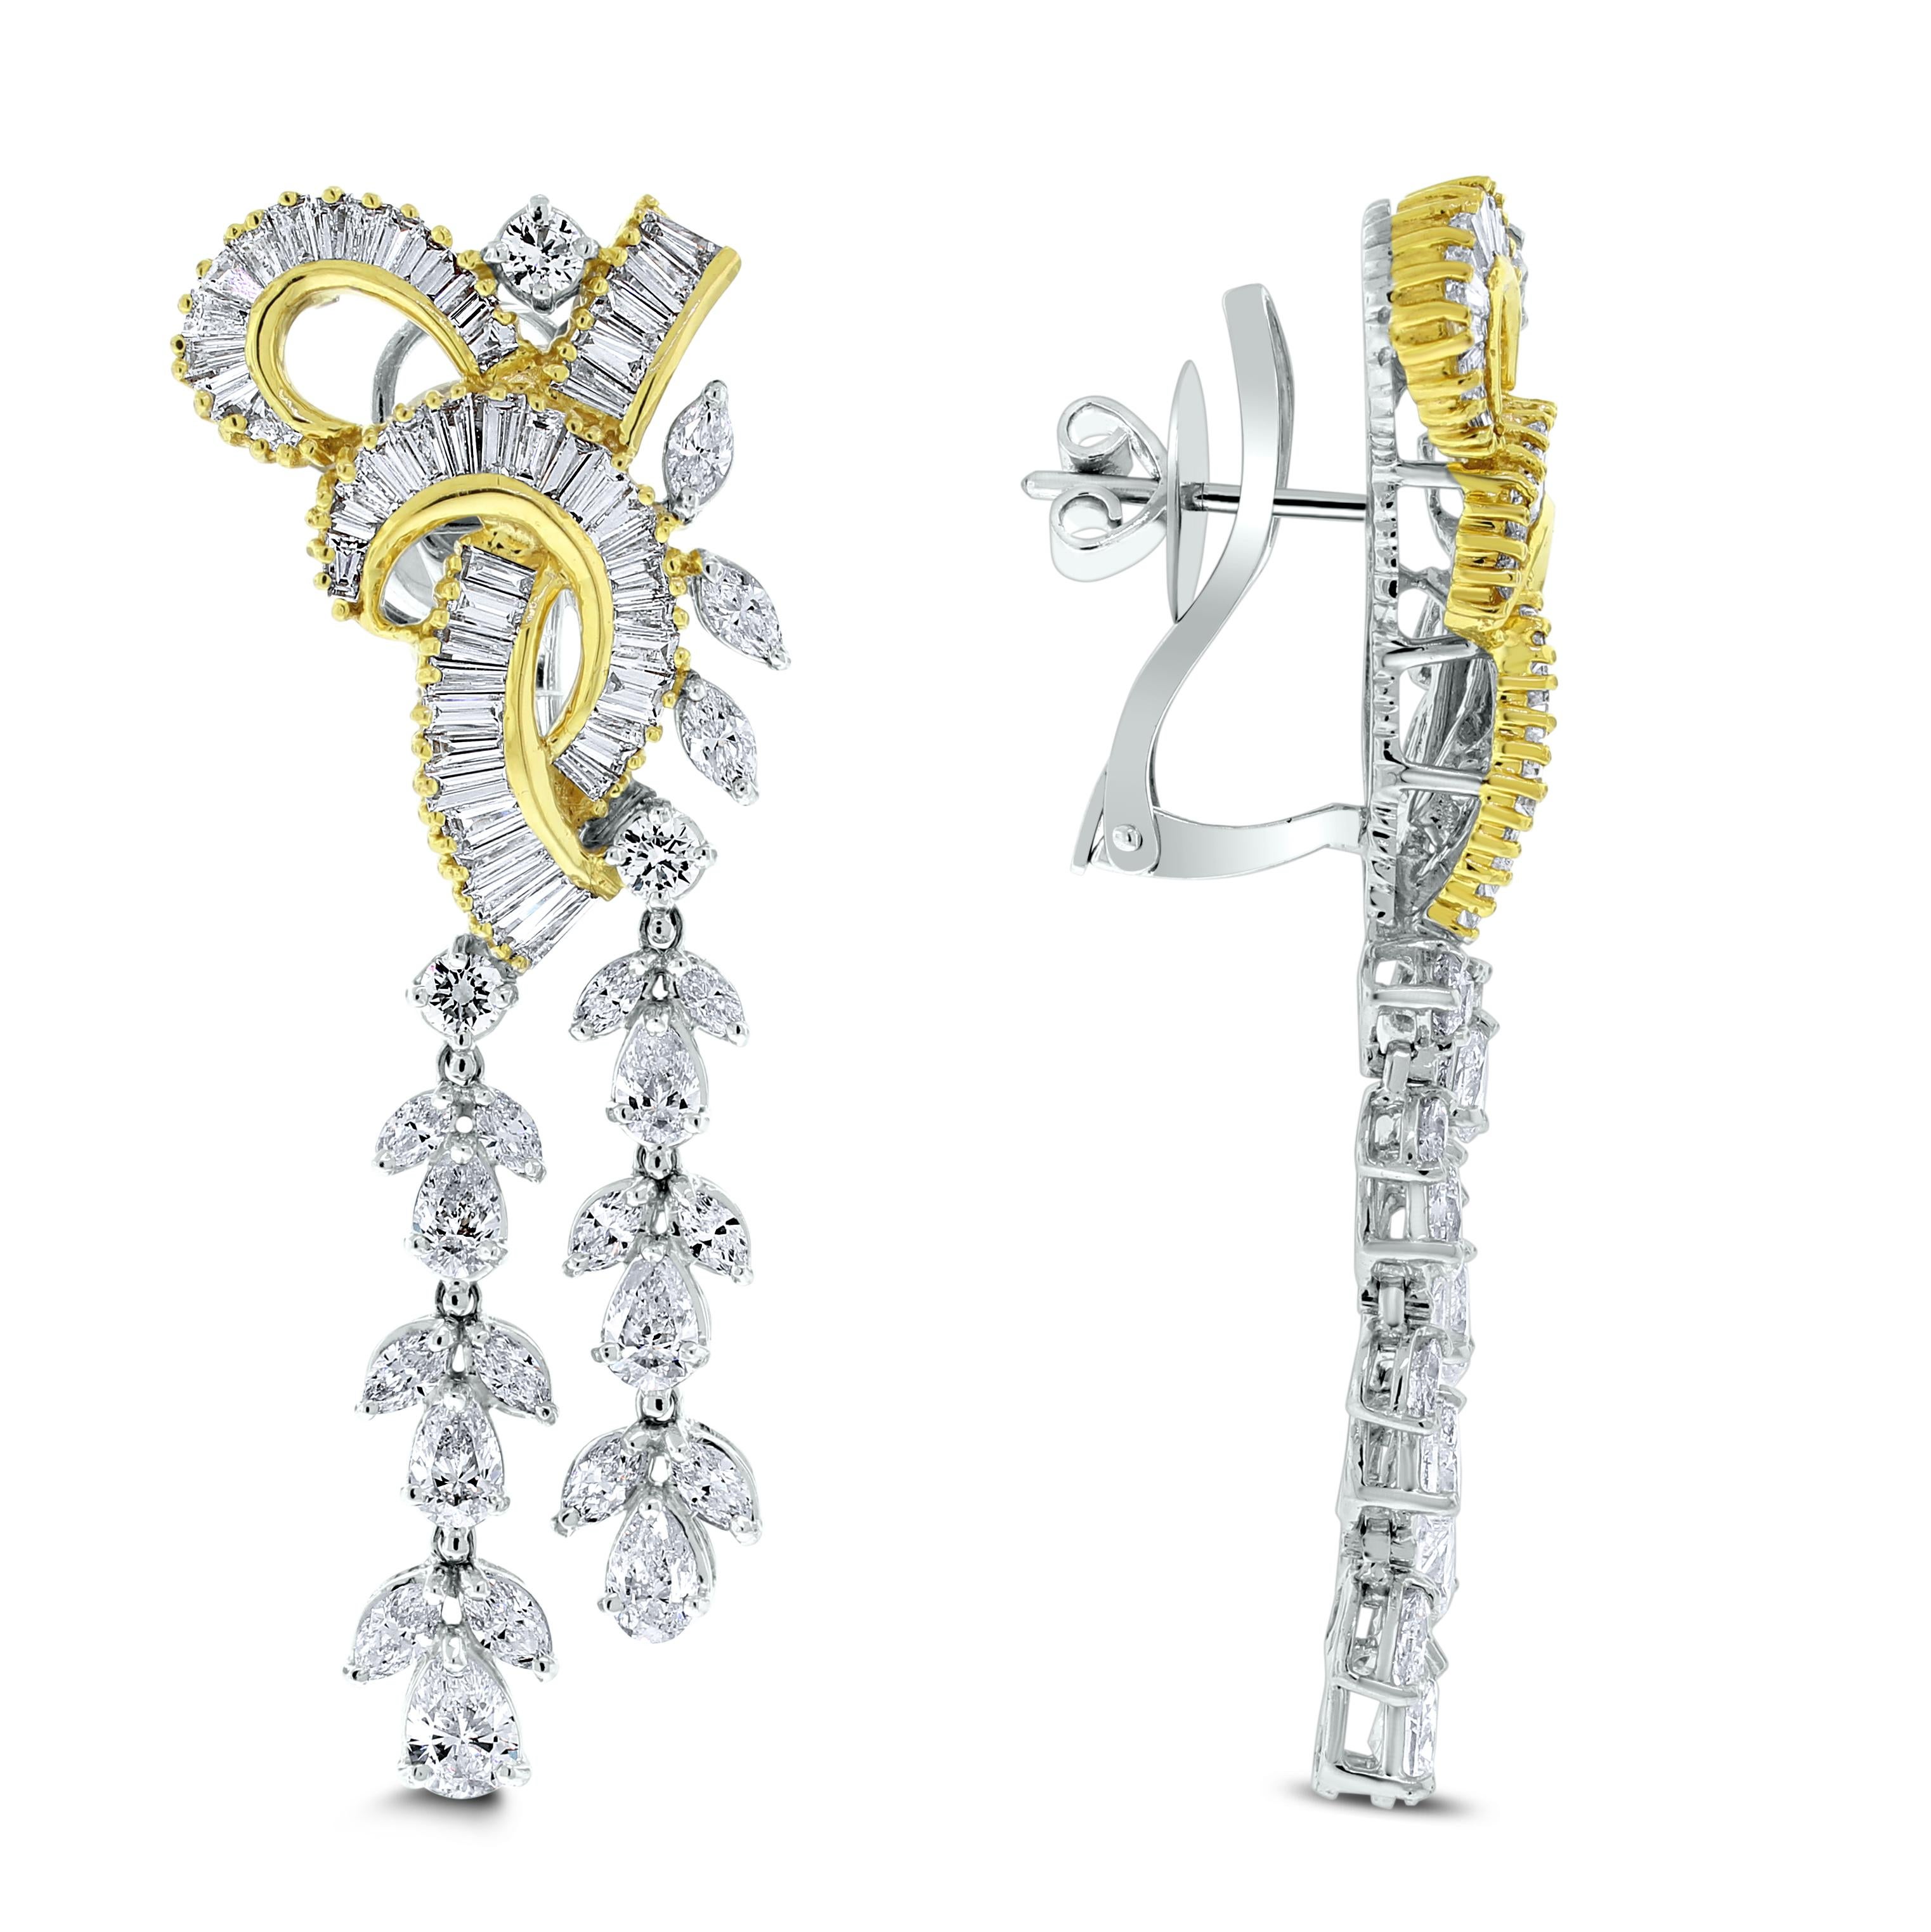 Beauvince Scintilla Necklace and Earrings Suite 37.34 carat Diamonds in Gold 1